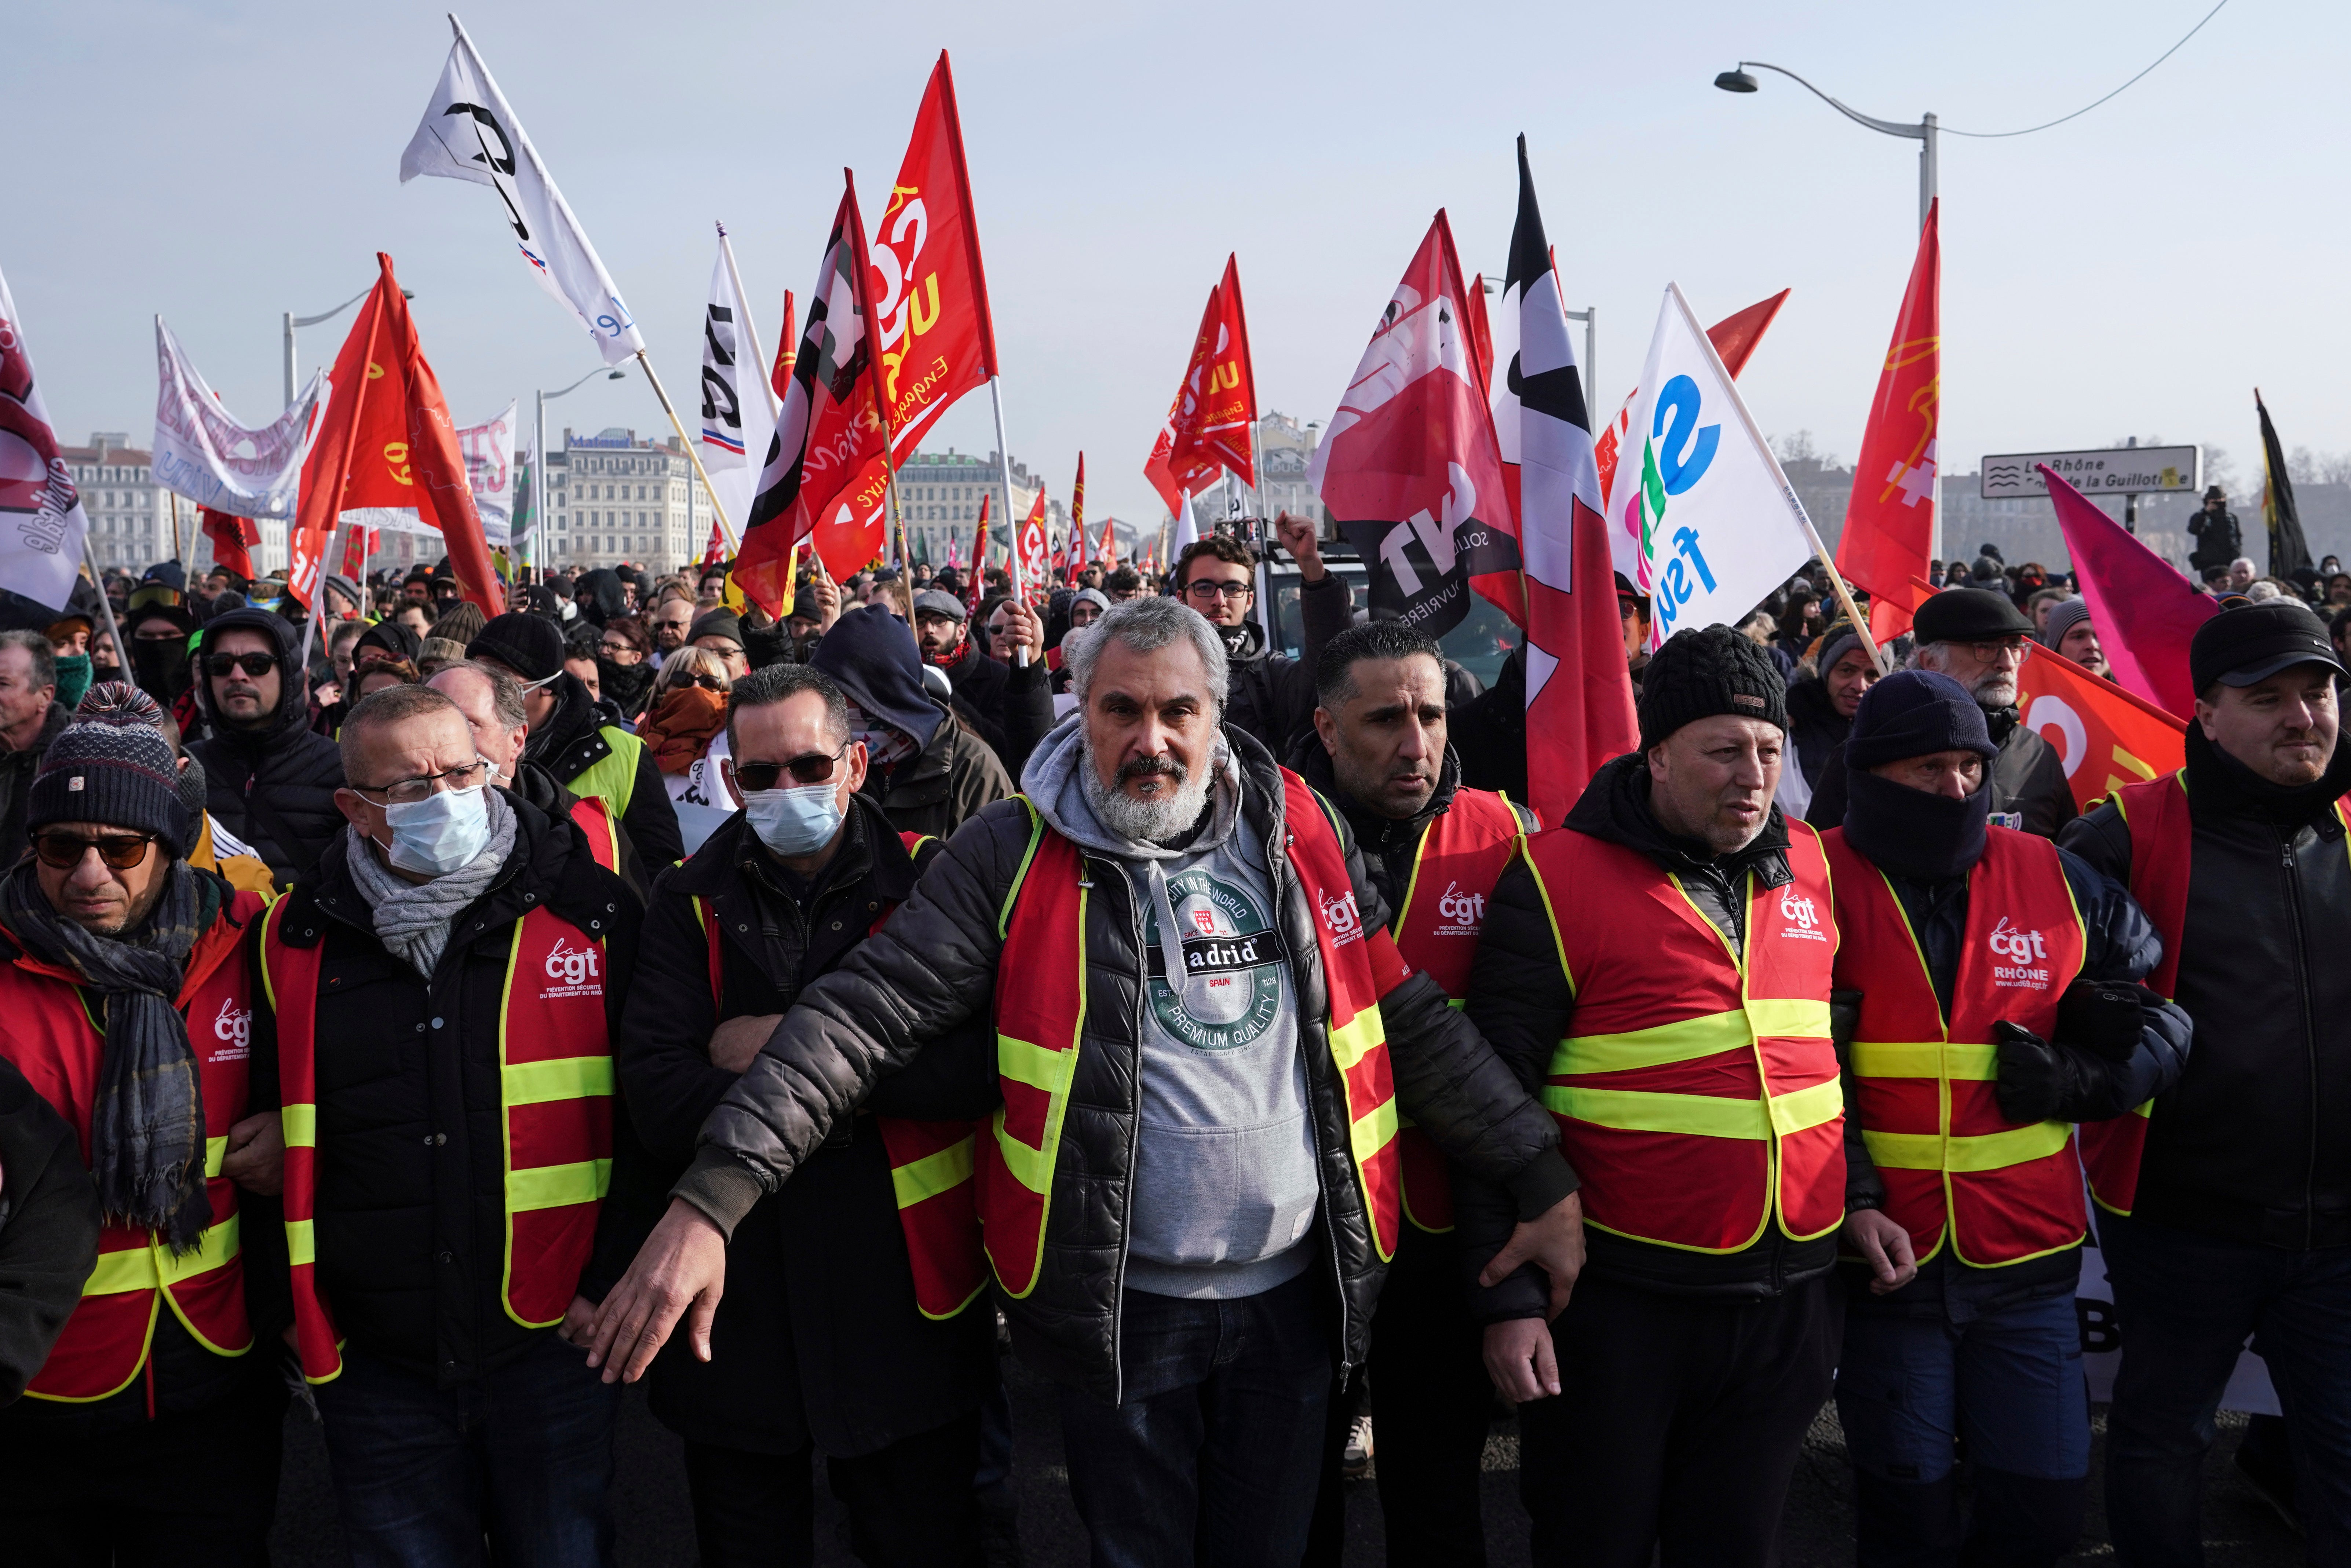 Unions protested the last attempt at pension reforms in 2020, including this pictured march in Lyon